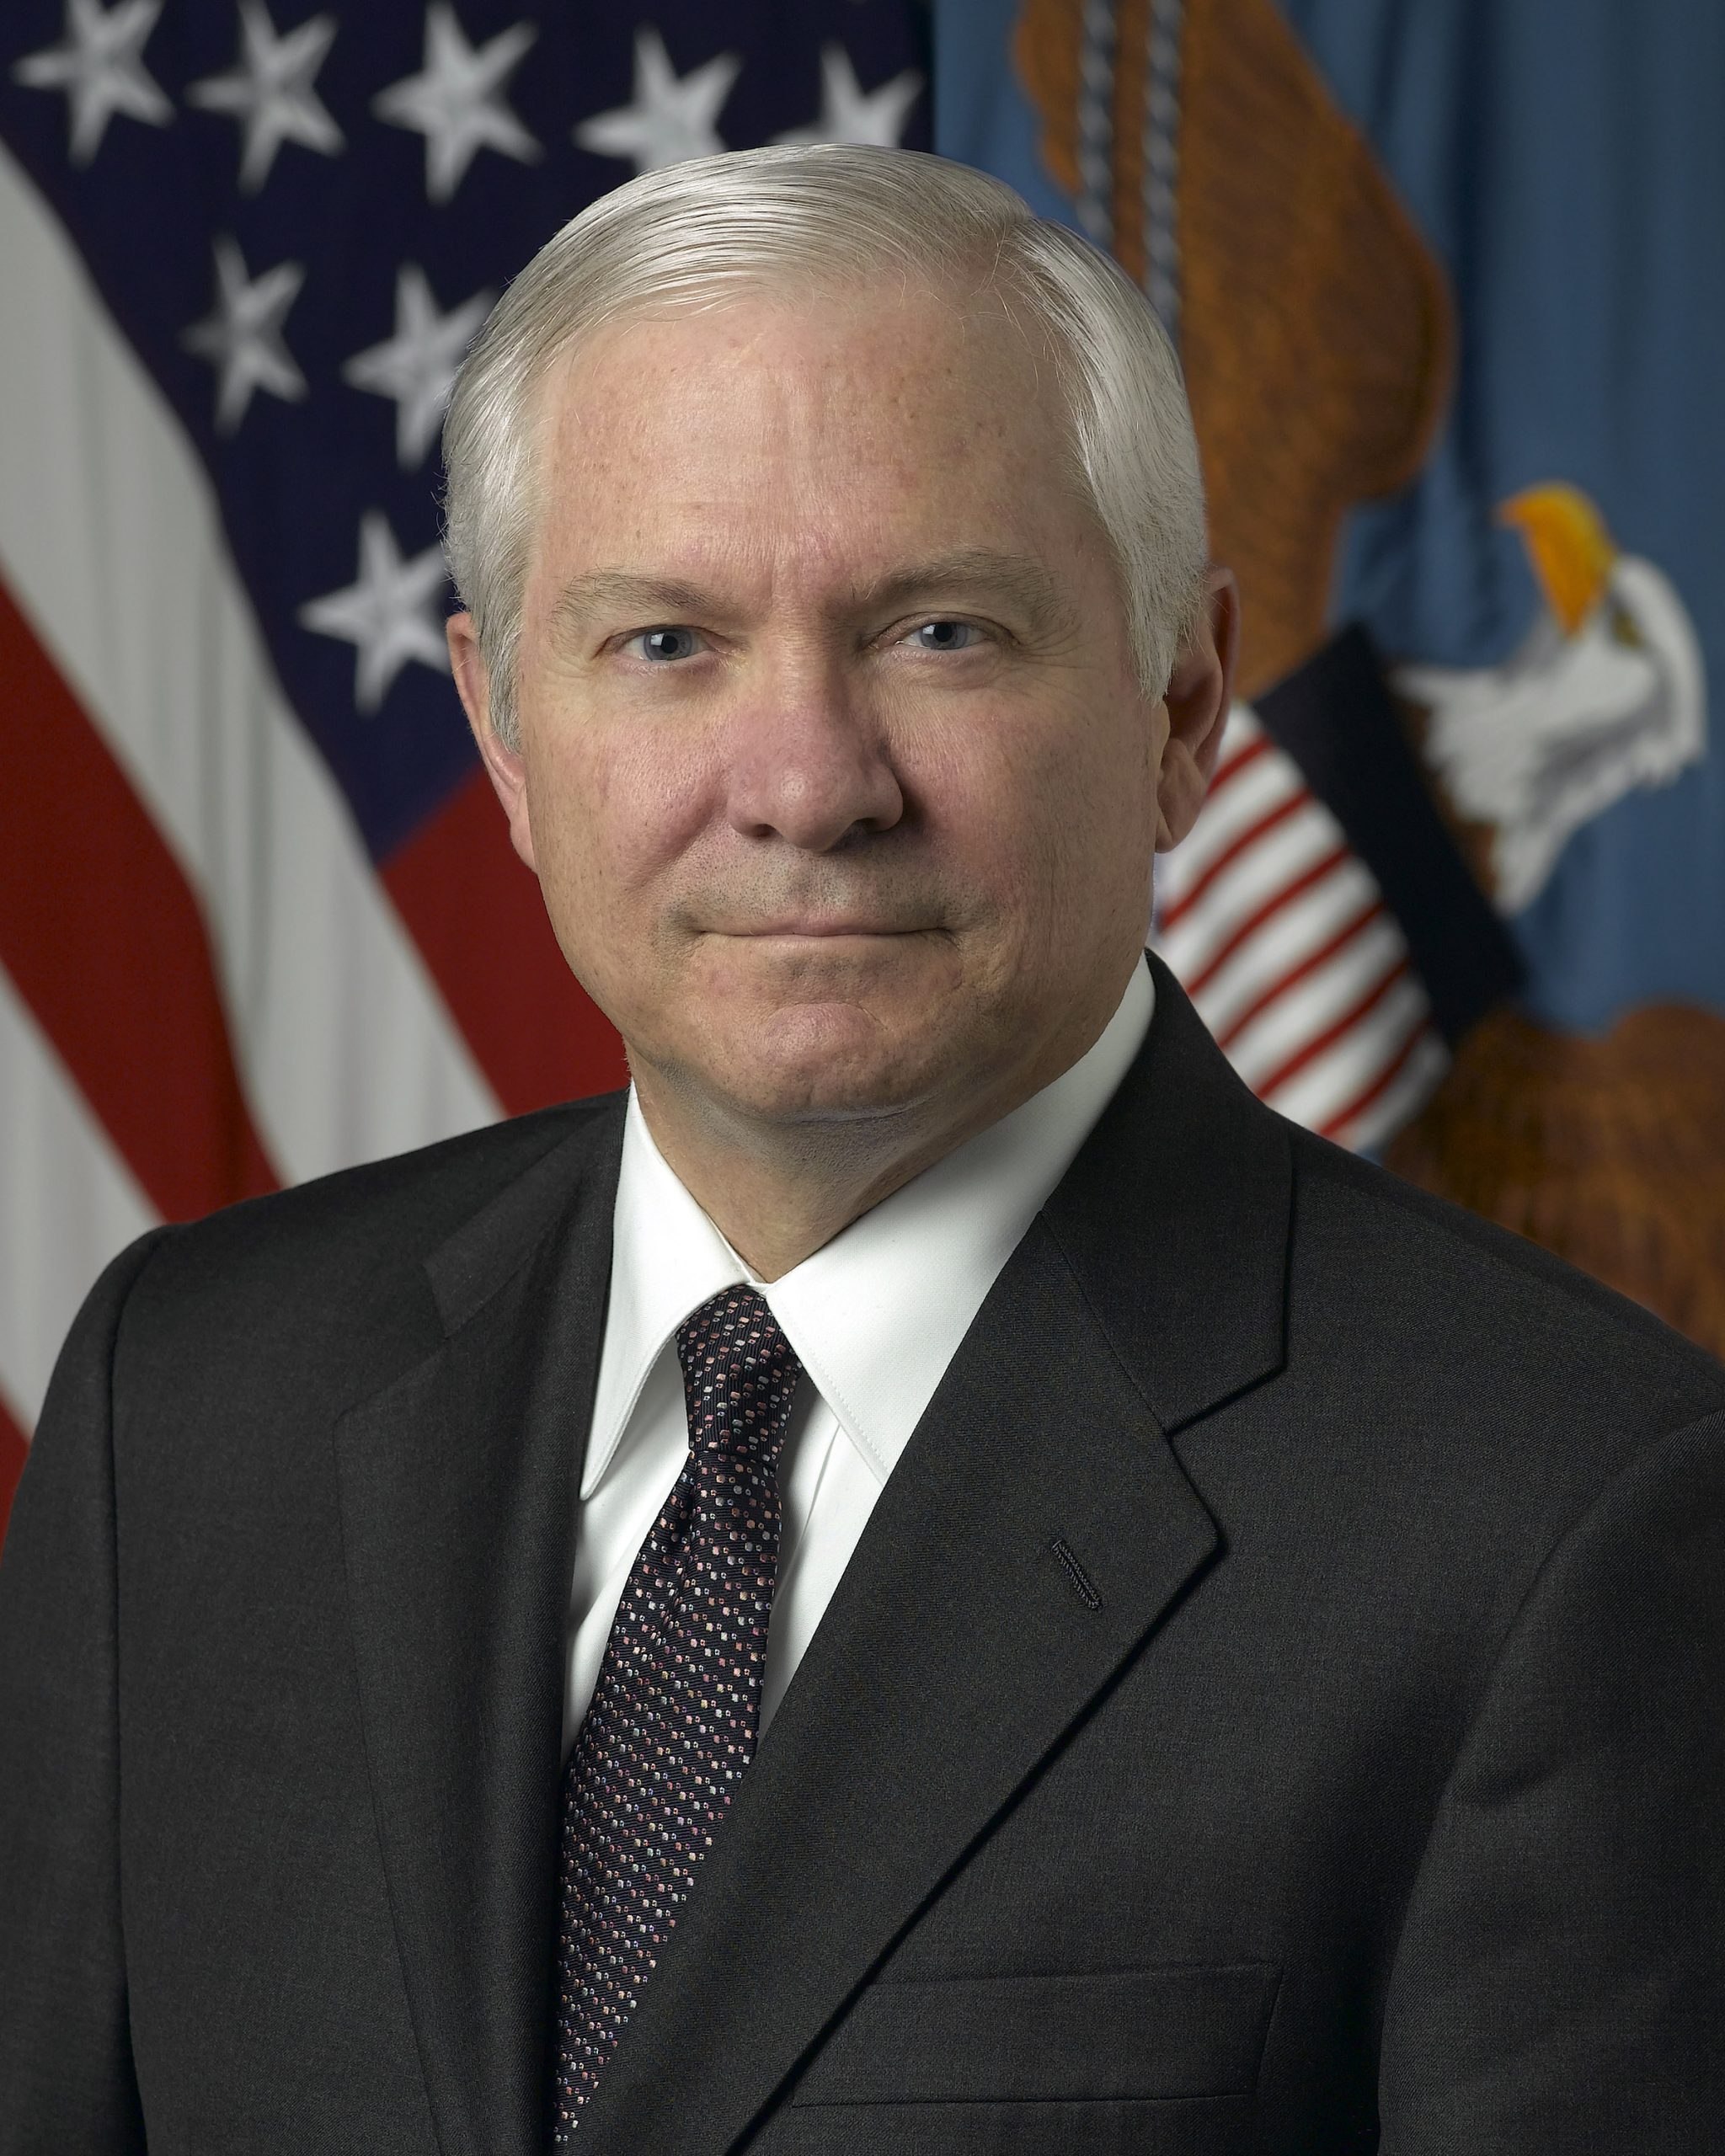 Join us for An Evening with Dr. Robert Gates.